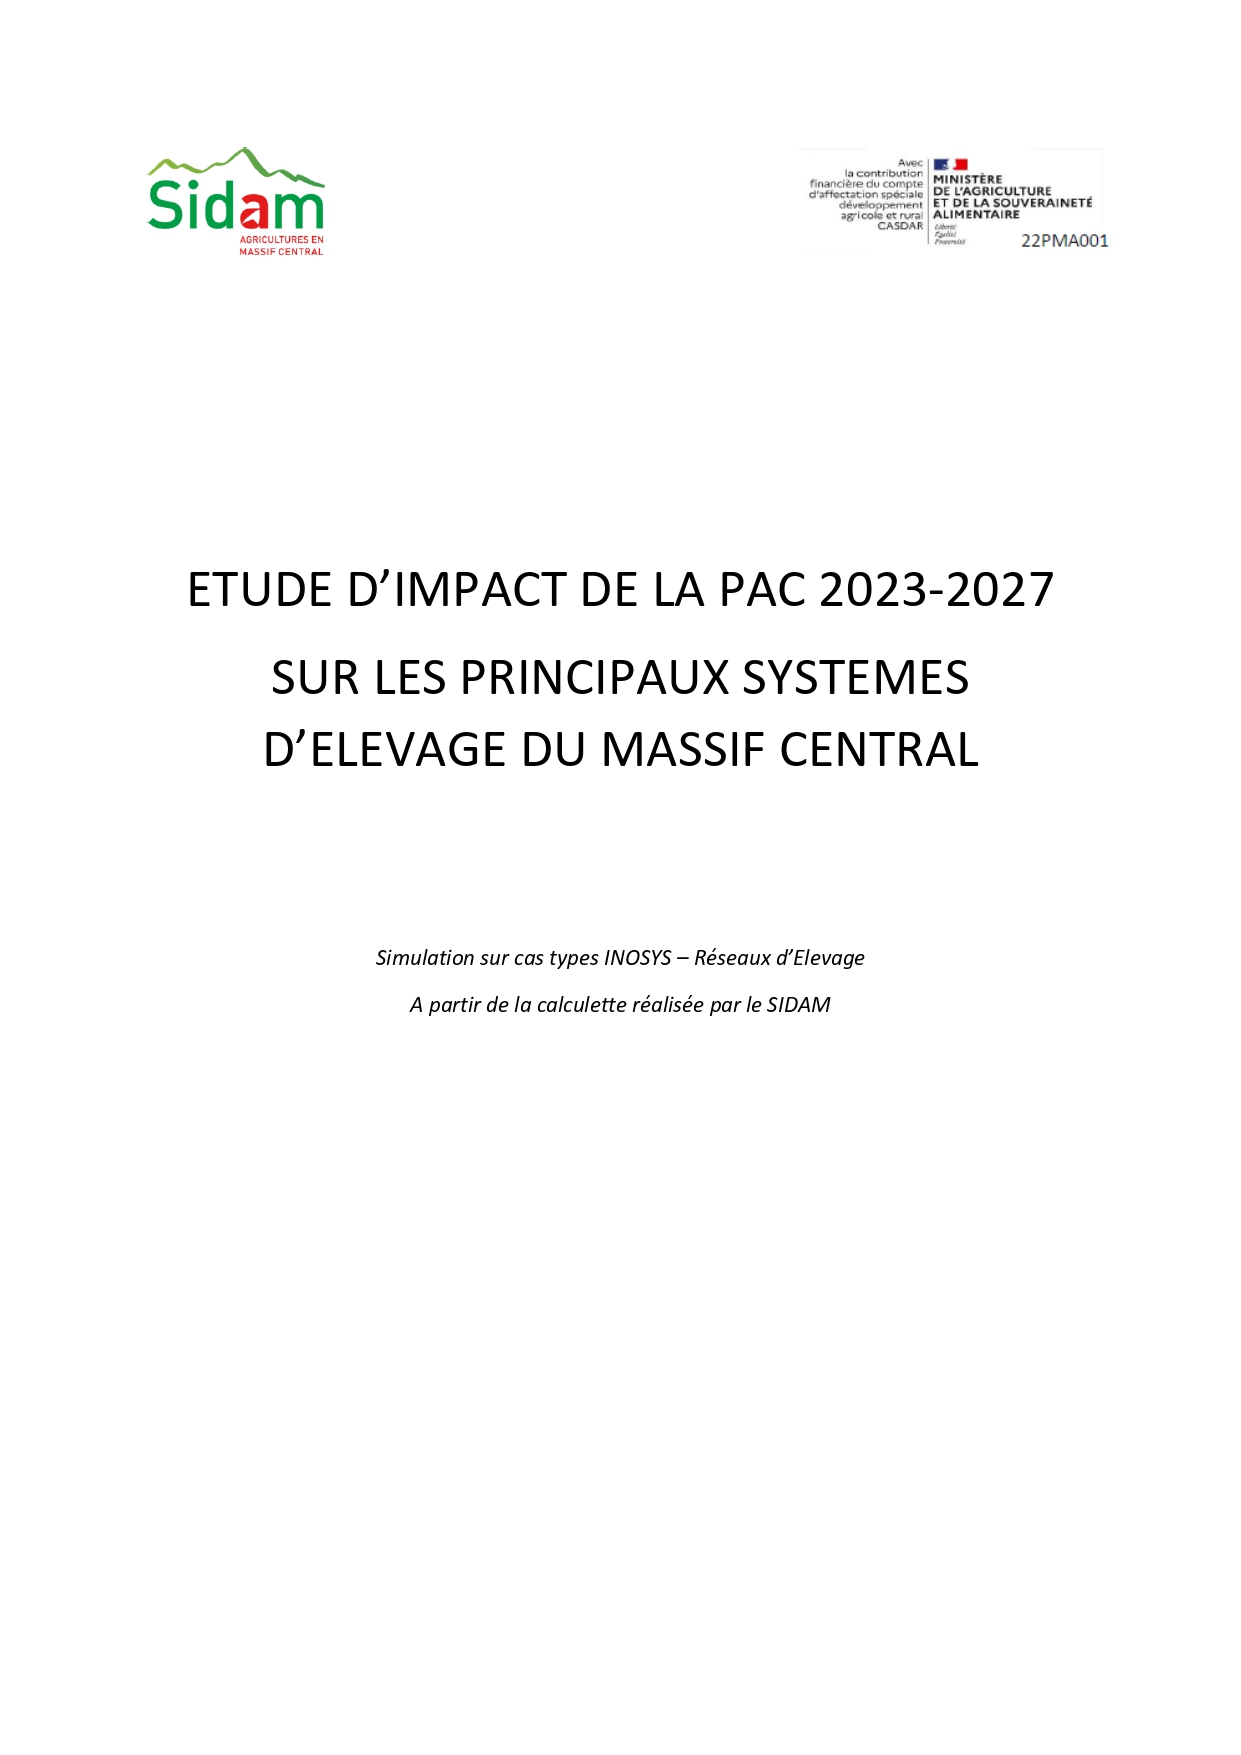 Etude impact PAC 23-27 sur castypes INOSYS-1-68_pages-to-jpg-0001